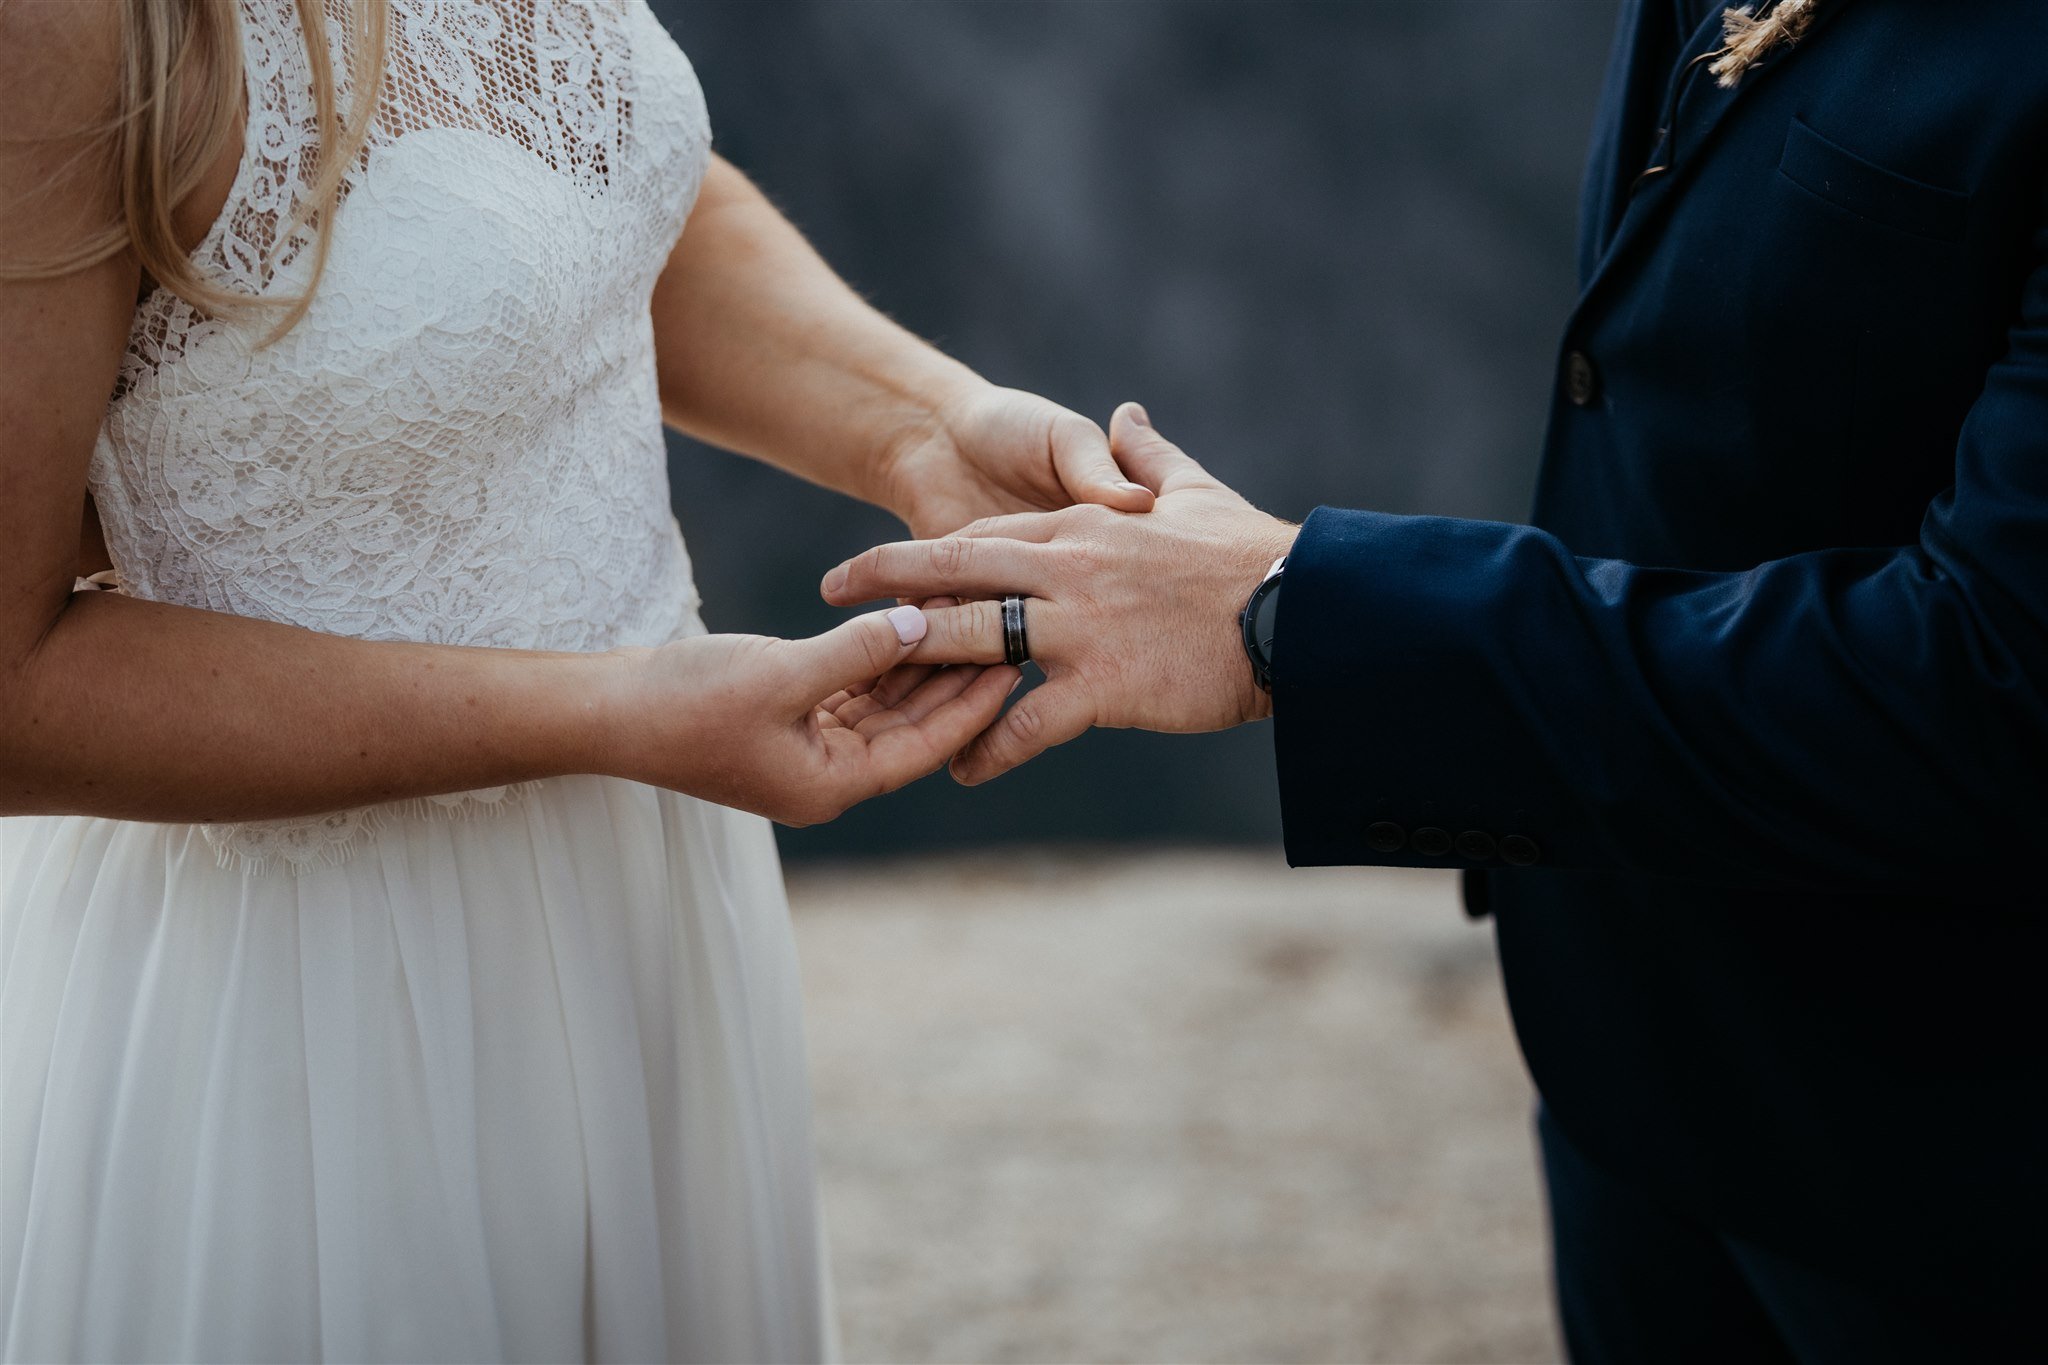 Couple exchanging rings during elopement ceremony